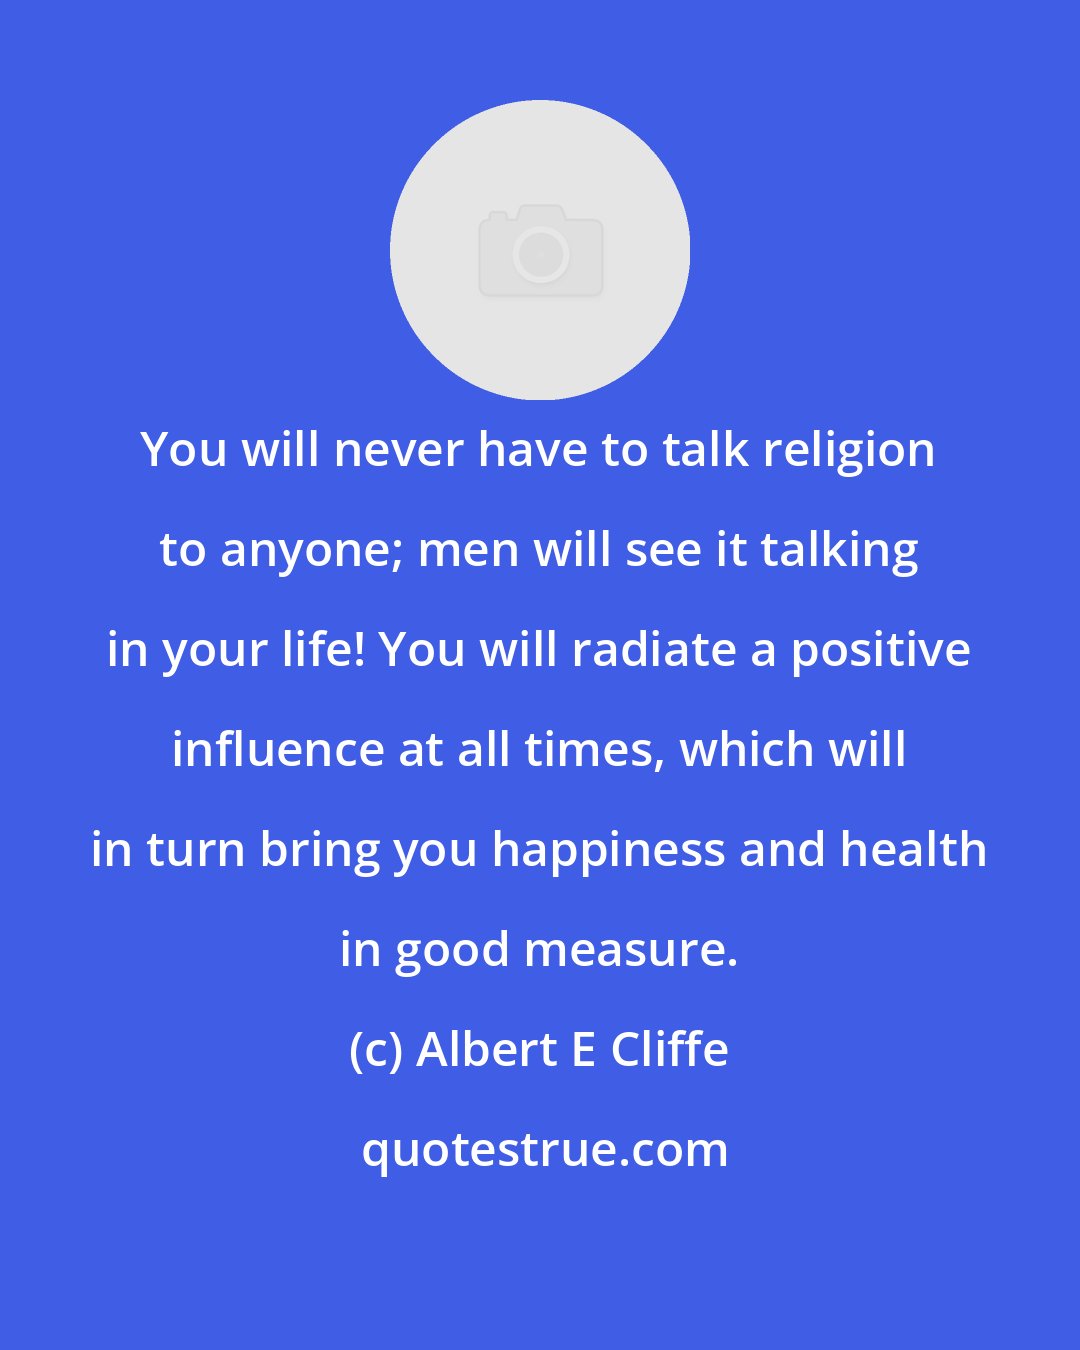 Albert E Cliffe: You will never have to talk religion to anyone; men will see it talking in your life! You will radiate a positive influence at all times, which will in turn bring you happiness and health in good measure.